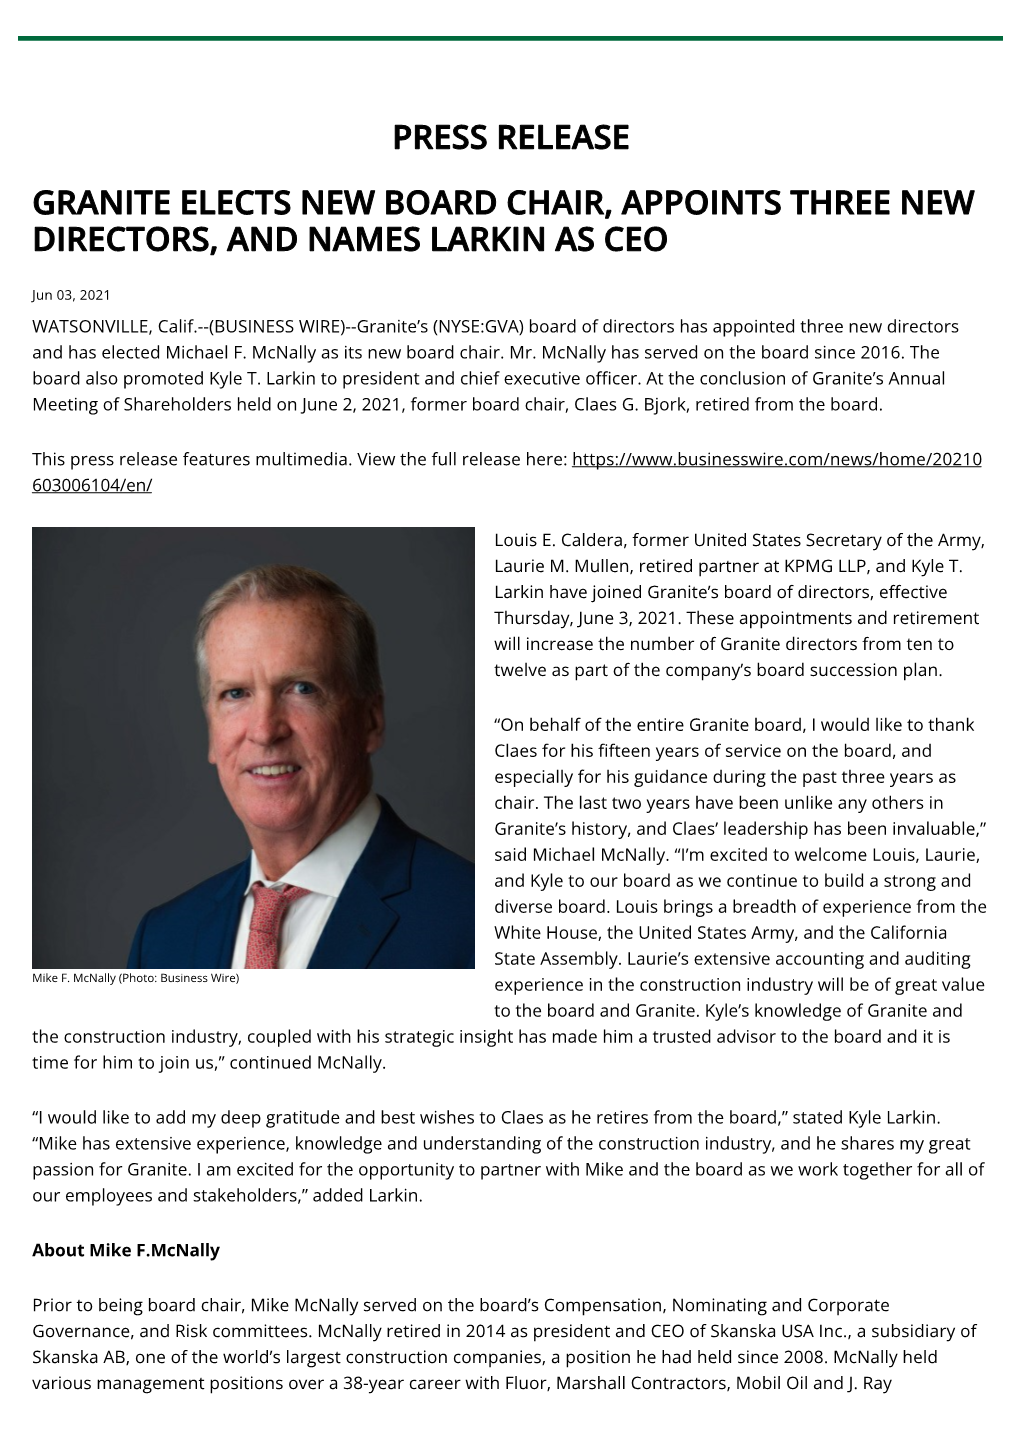 Press Release Granite Elects New Board Chair, Appoints Three New Directors, and Names Larkin As Ceo